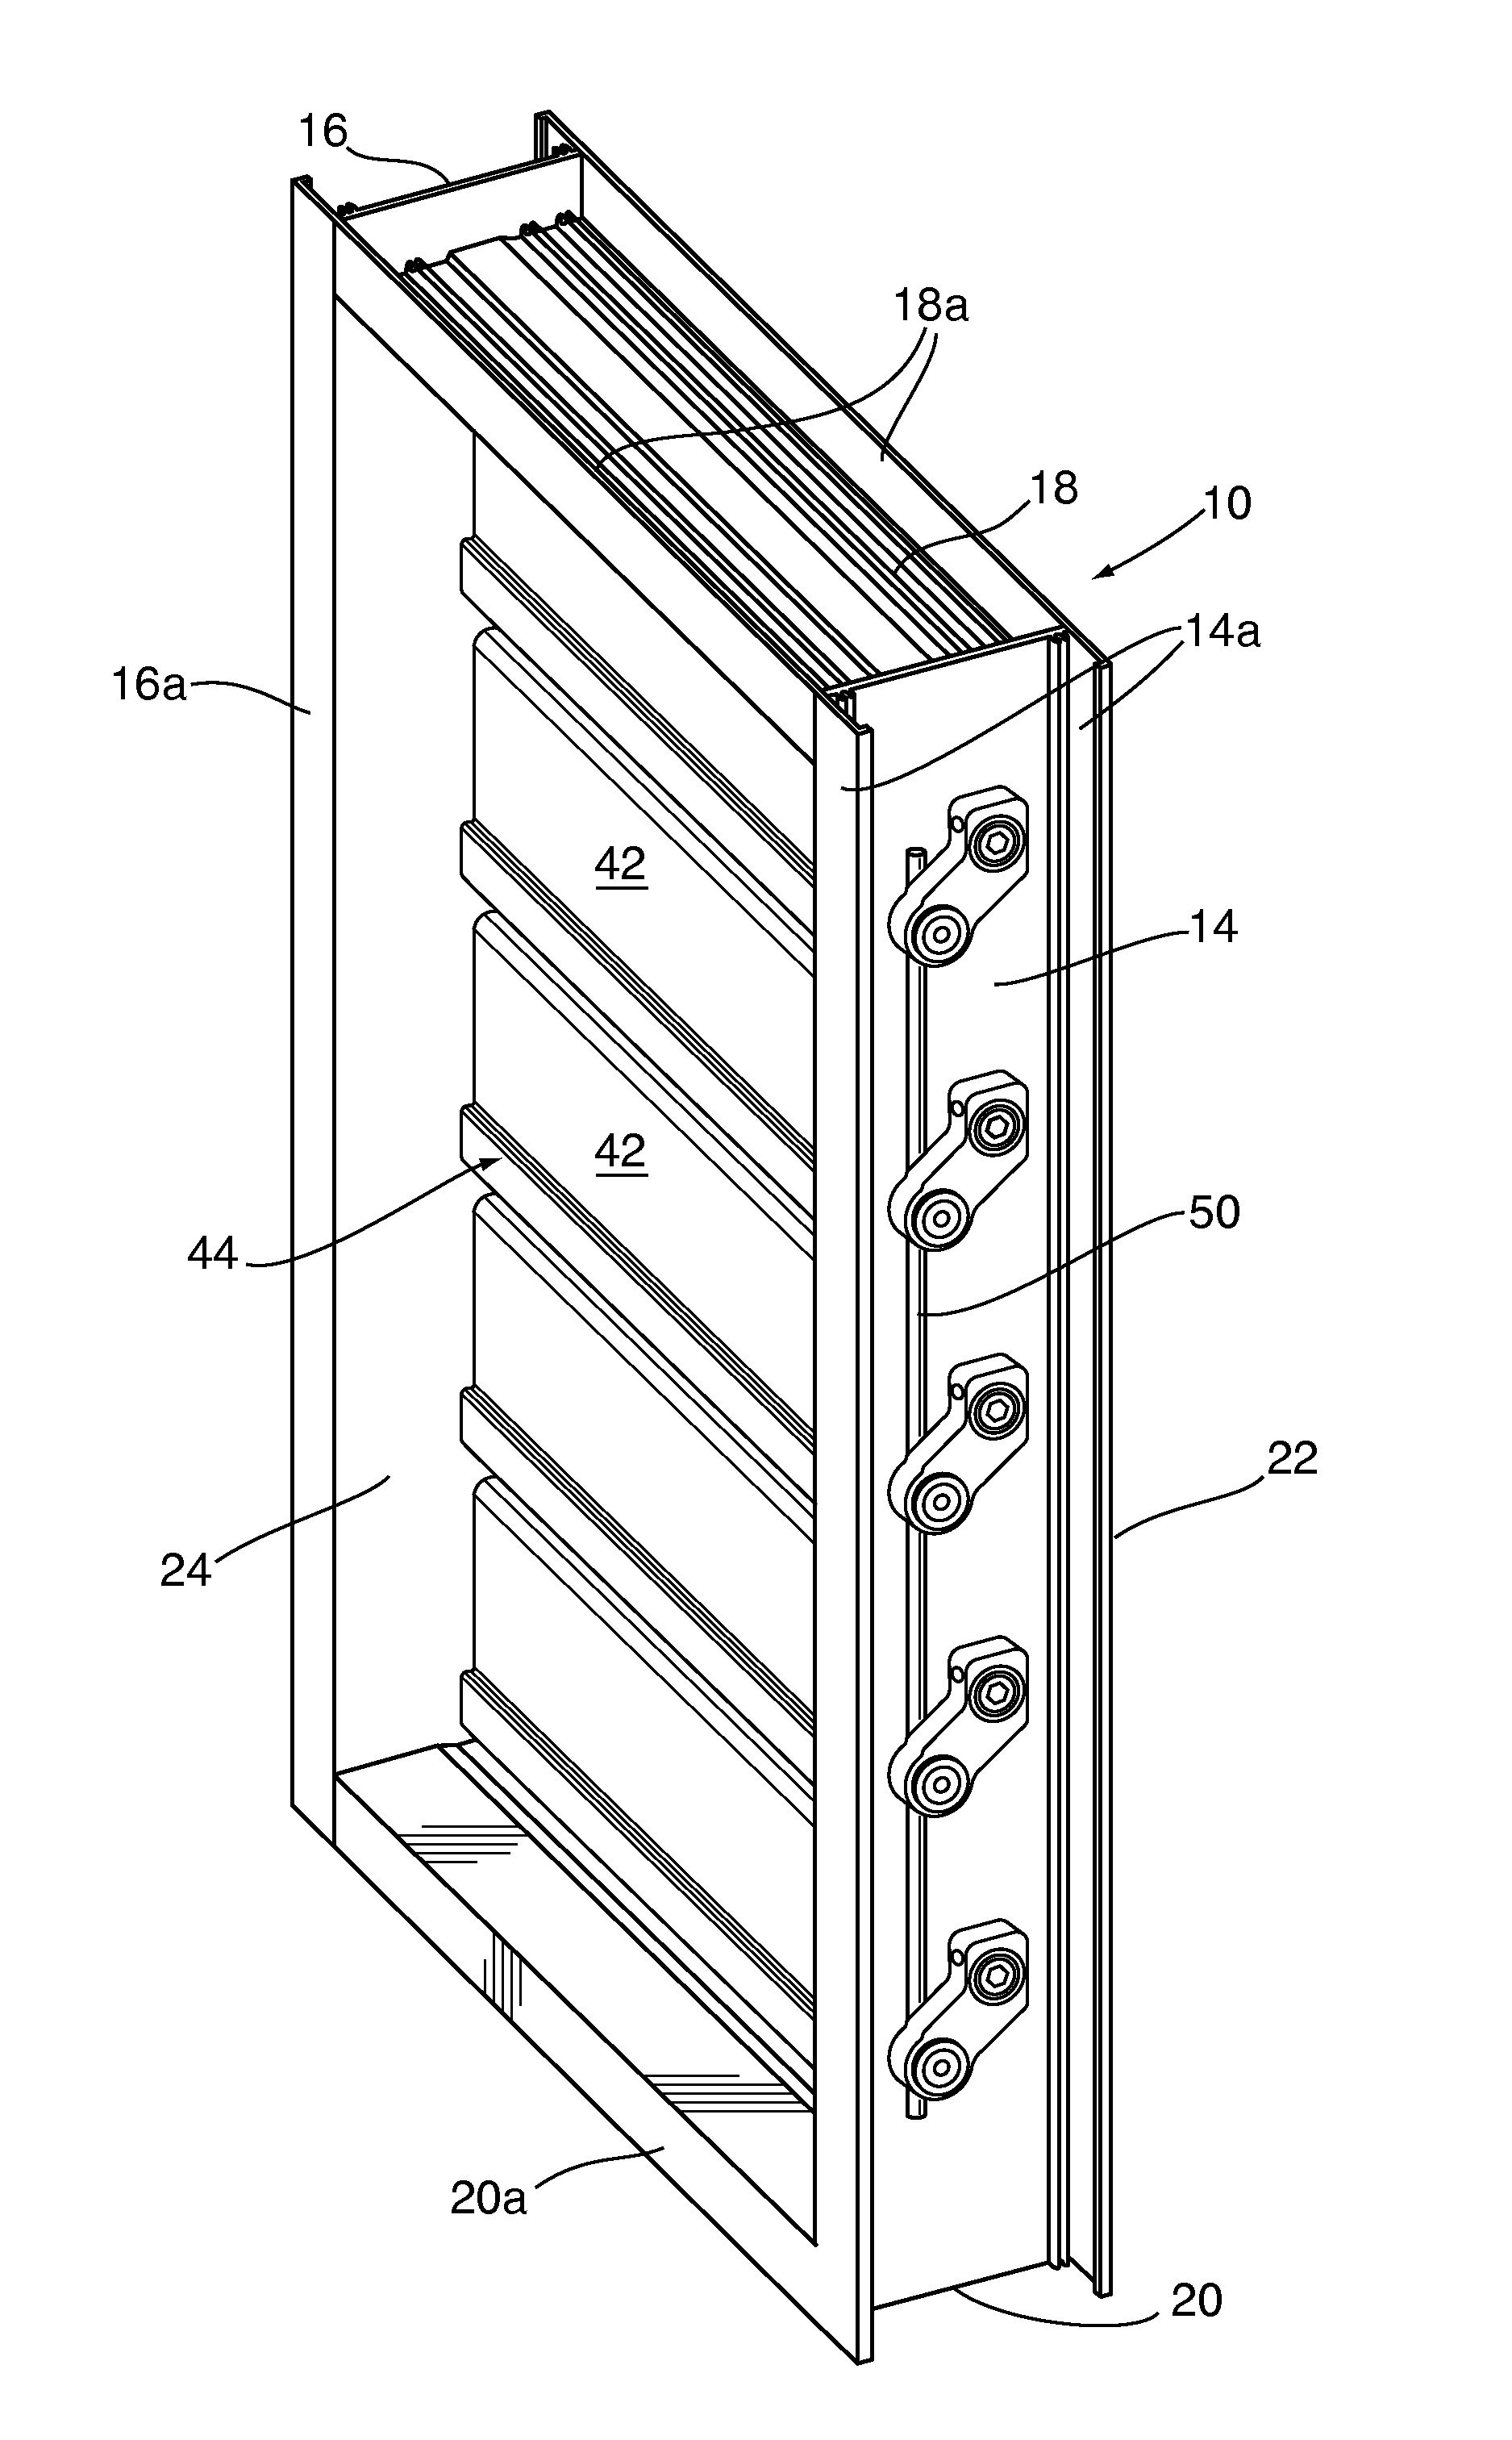 Counterweighted backdraft damper blade with improved airflow profile